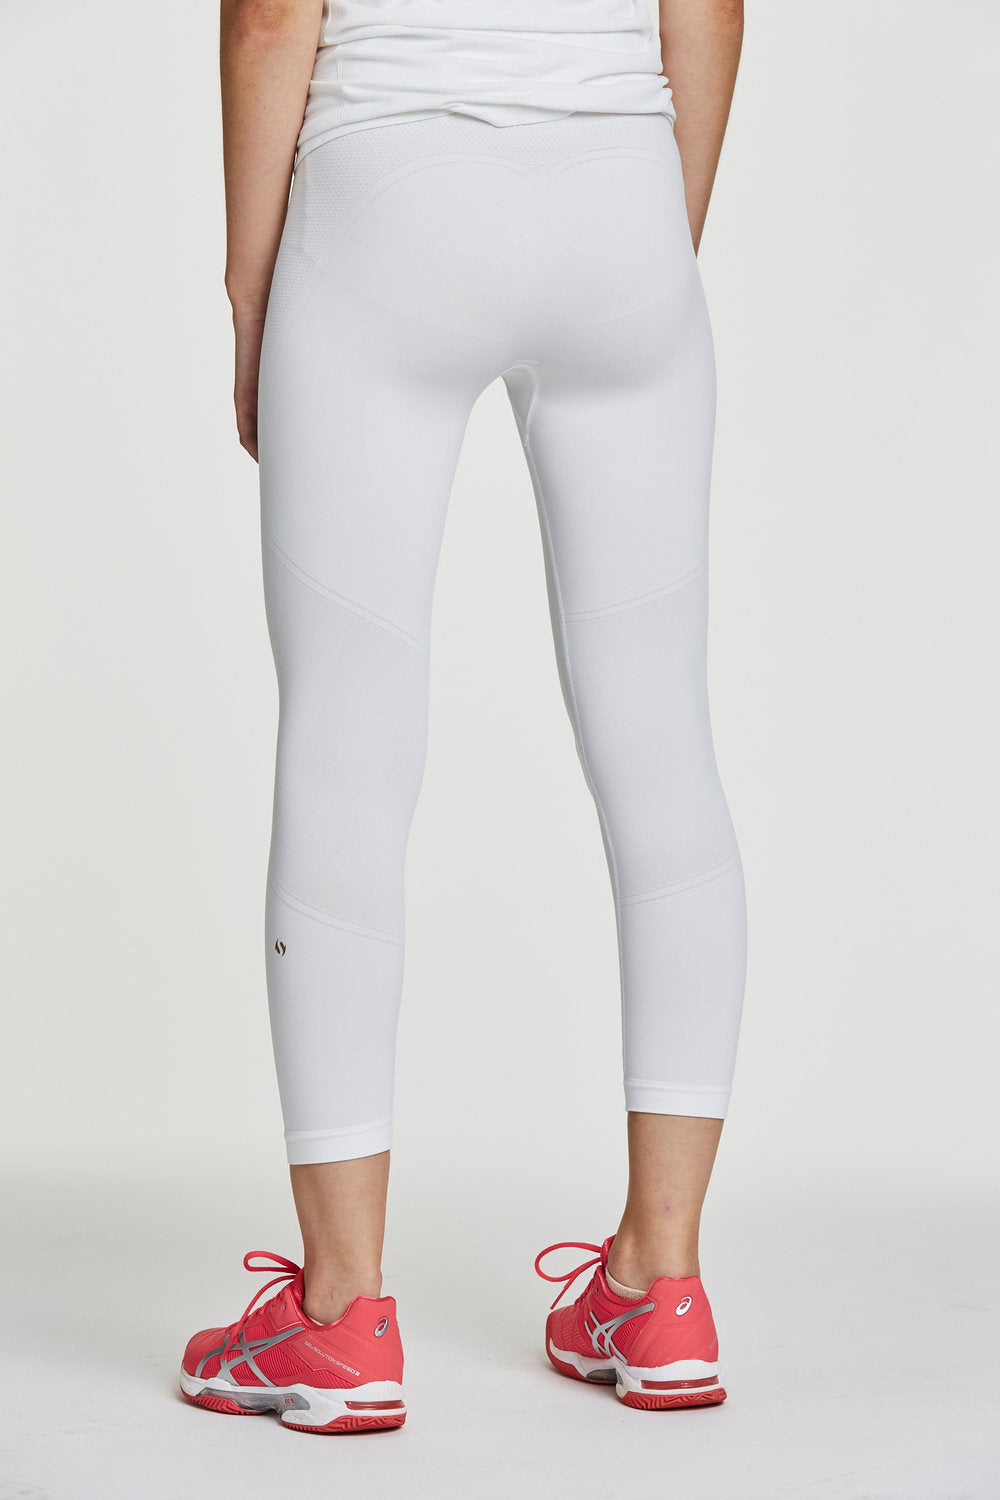 A-30 Tights White